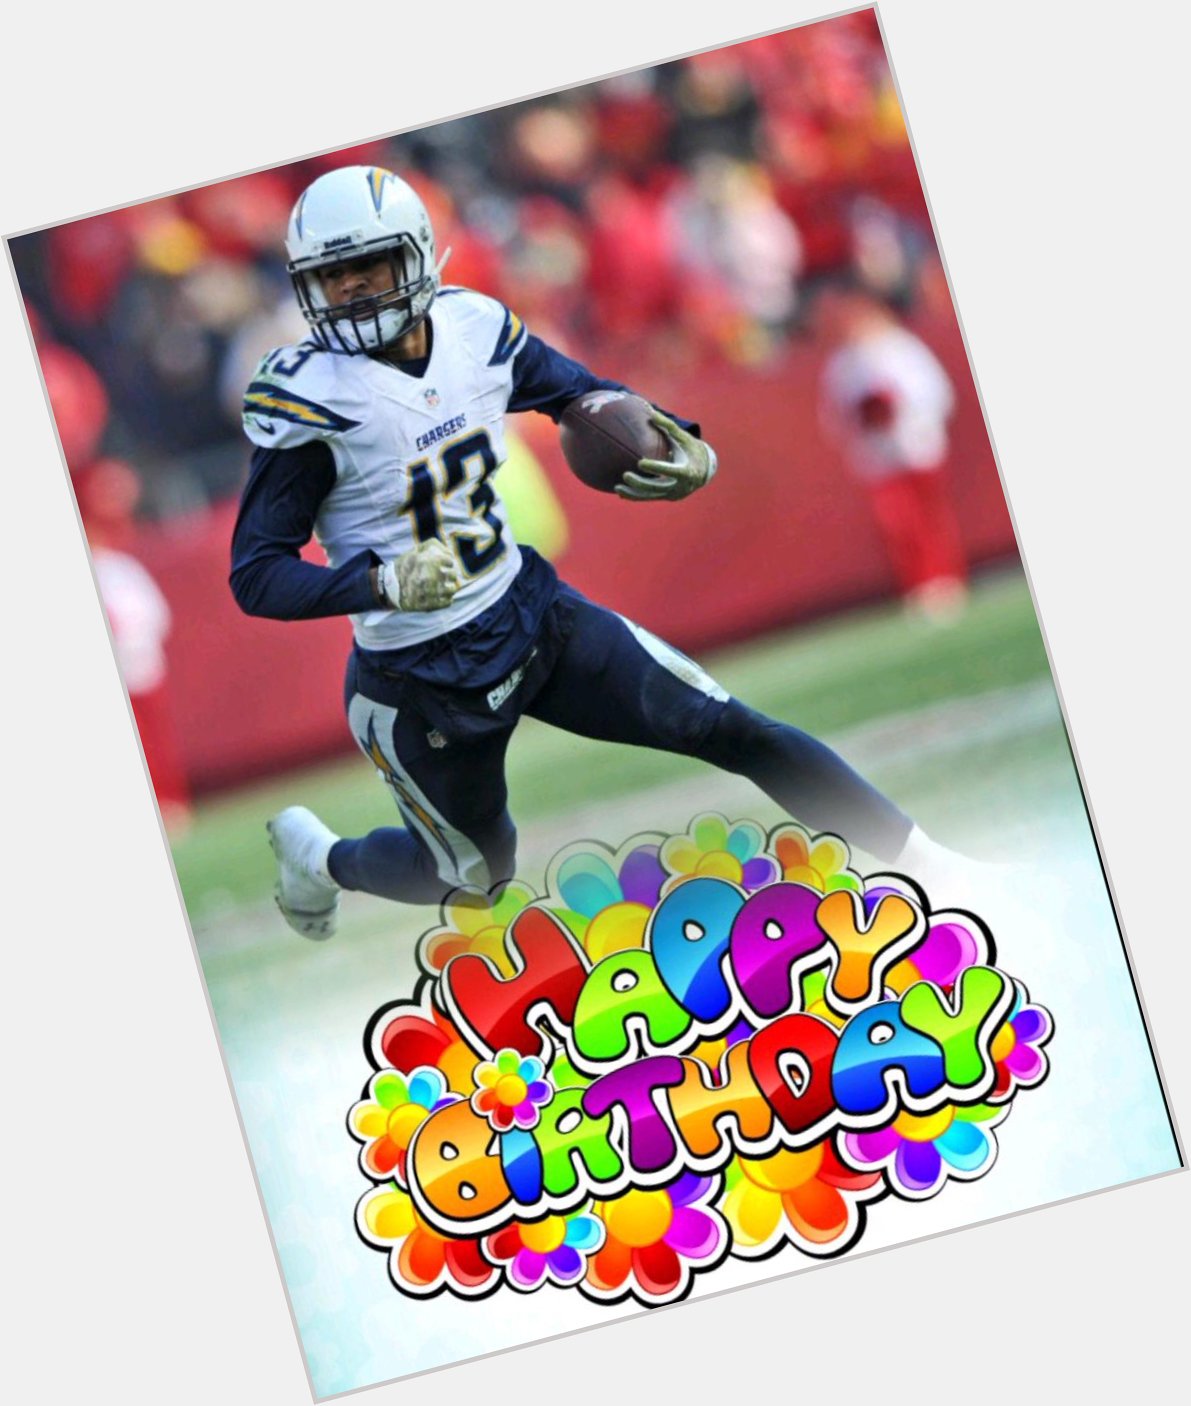 Happy Birthday to Keenan Allen! Over his career he has totaled 148 receptions, 1,829 yards and 12 TDs! 